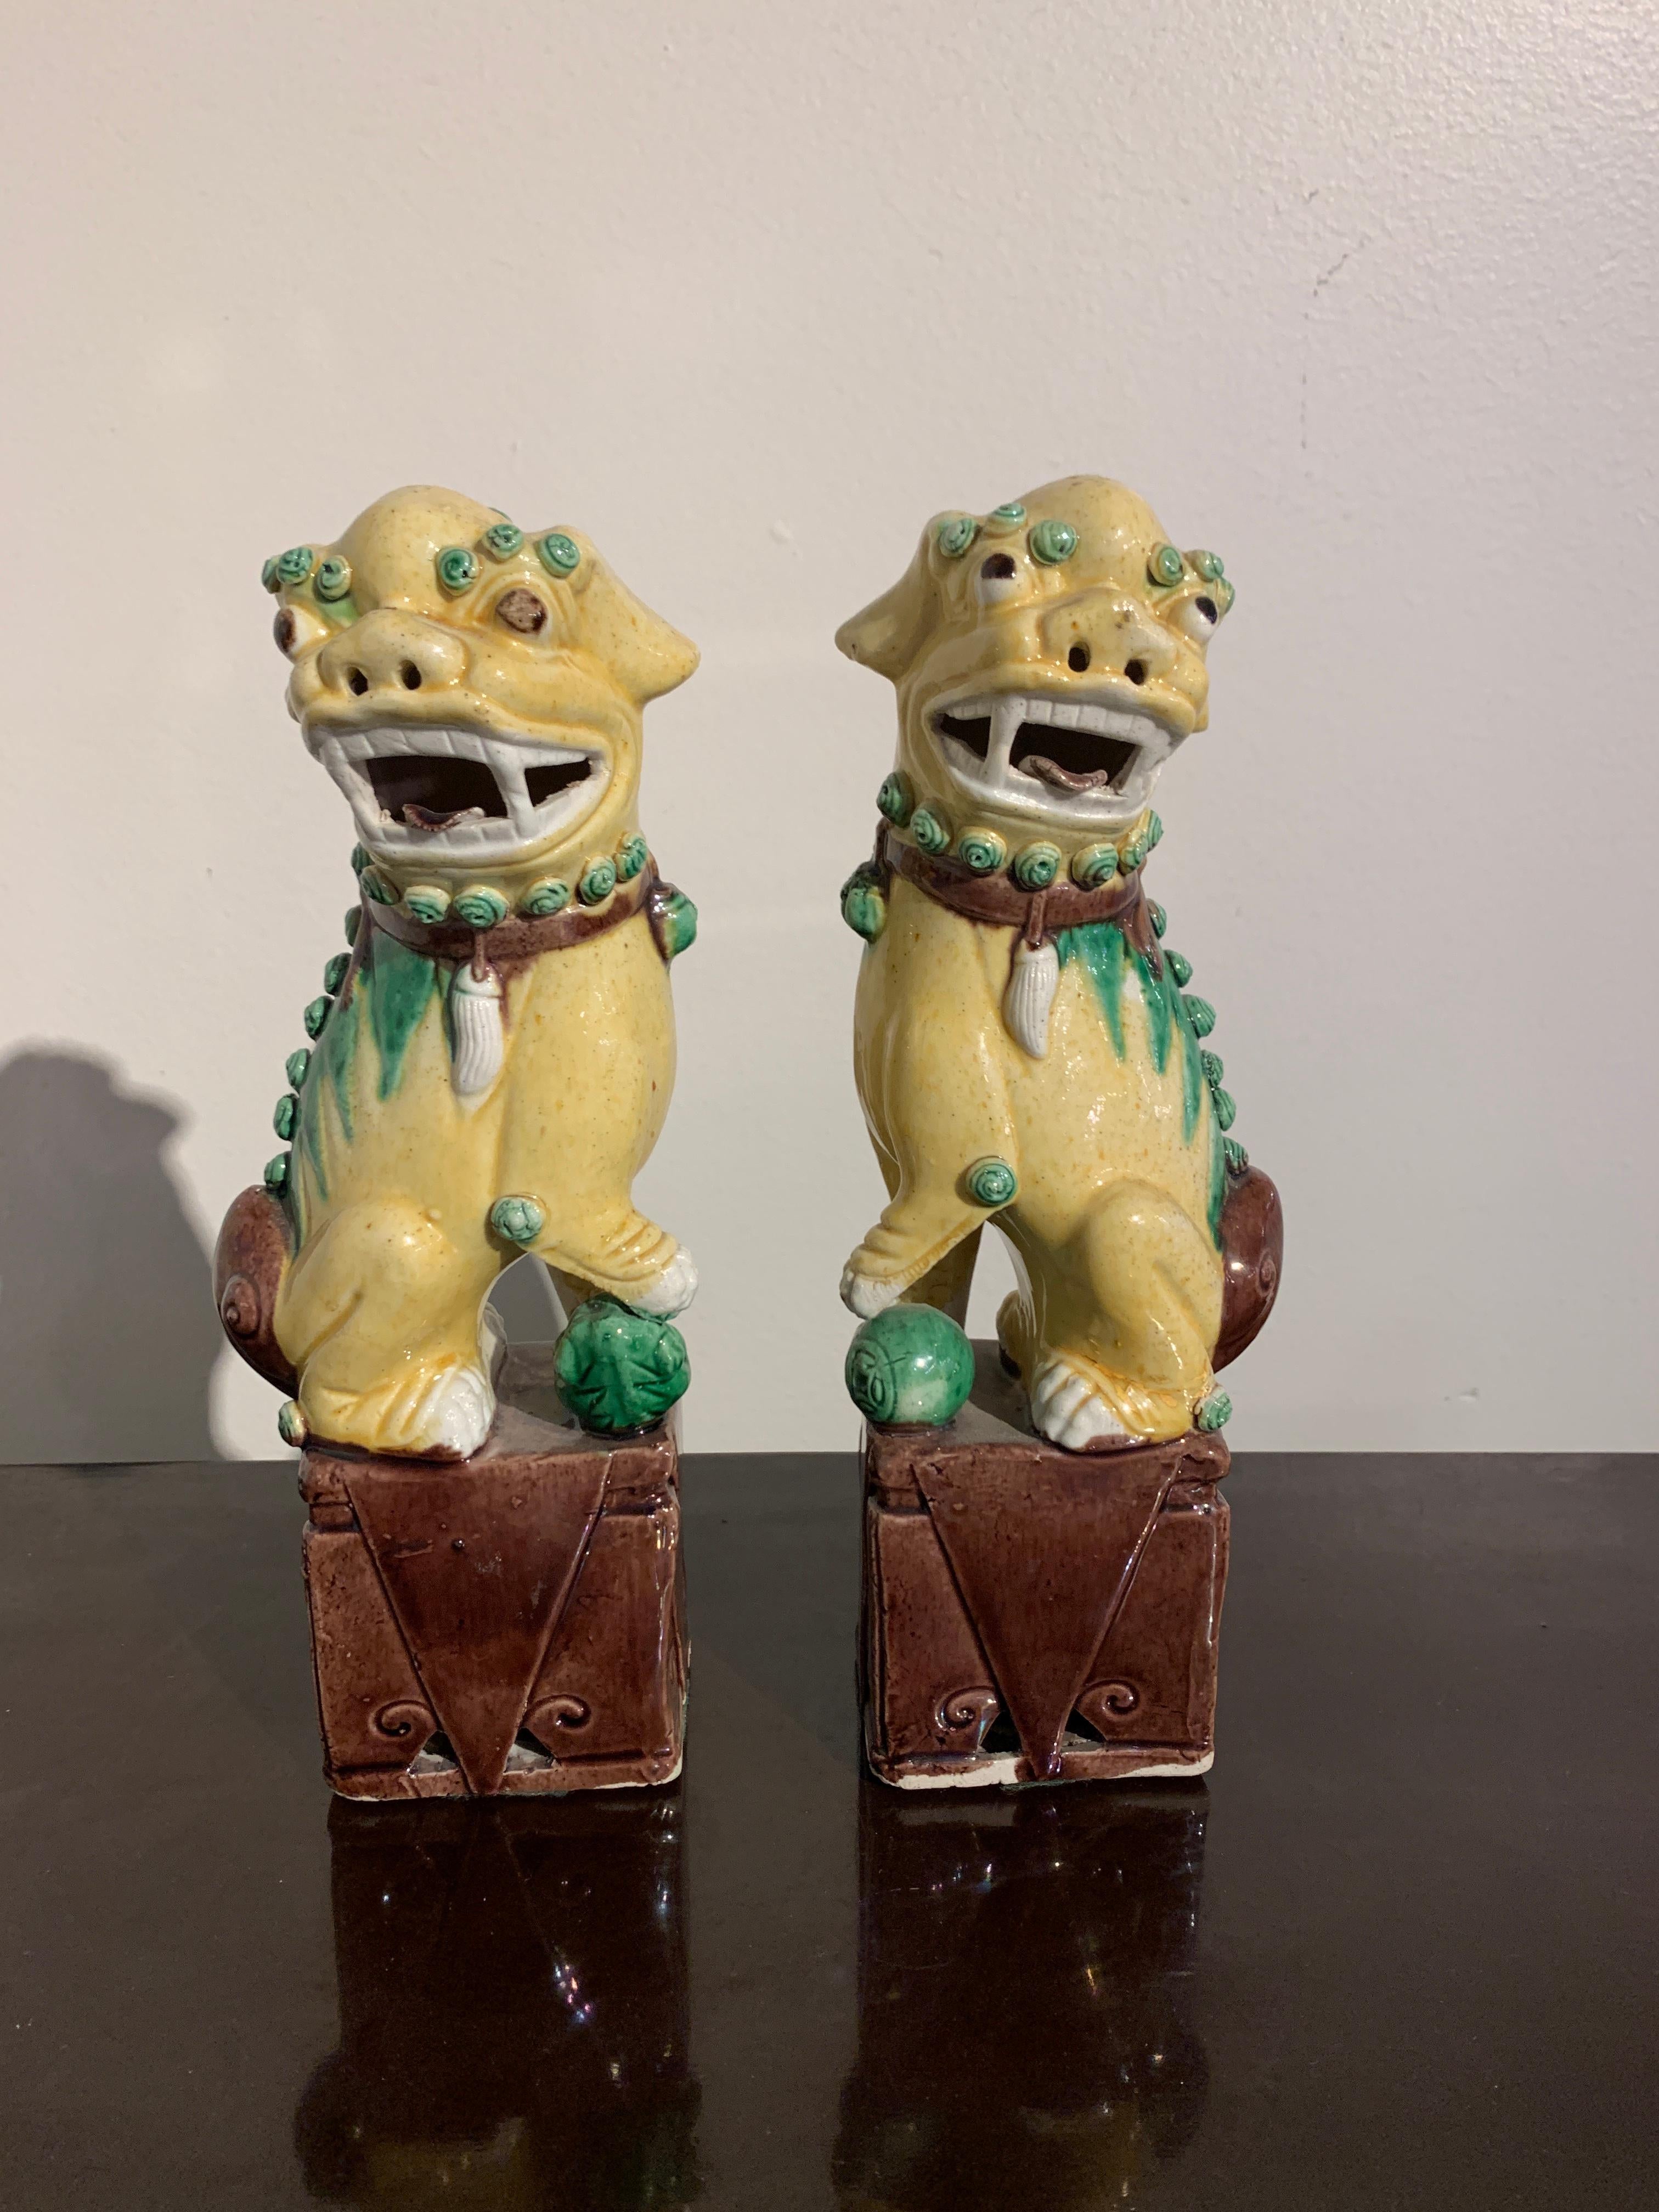 A fun and whimsical pair of Chinese porcelain foo dogs in yellow, green and purple brown glazes, Republic Period, circa 1920s. 

Each goofy foo dog glazed yellow with green and puce highlights, and seated upon a brownish purple glazed plinth.